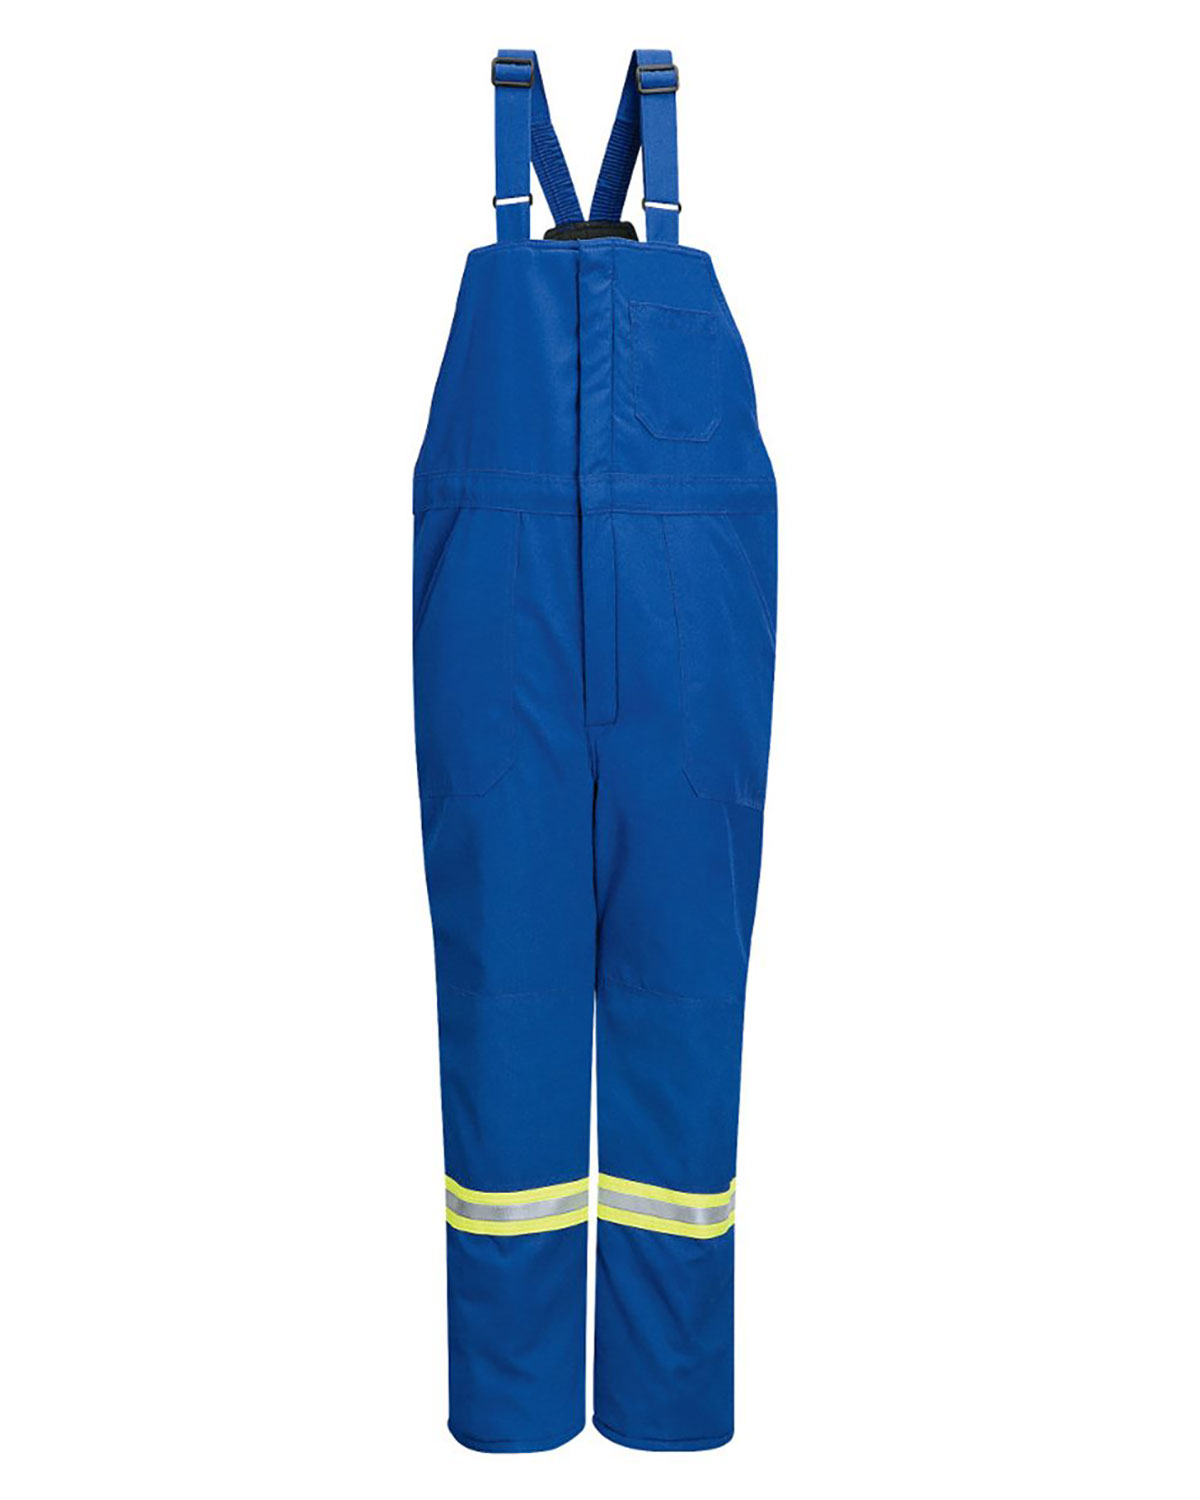 Deluxe Insulated Bib Overall with Reflective Trim - Nomex® IIIA